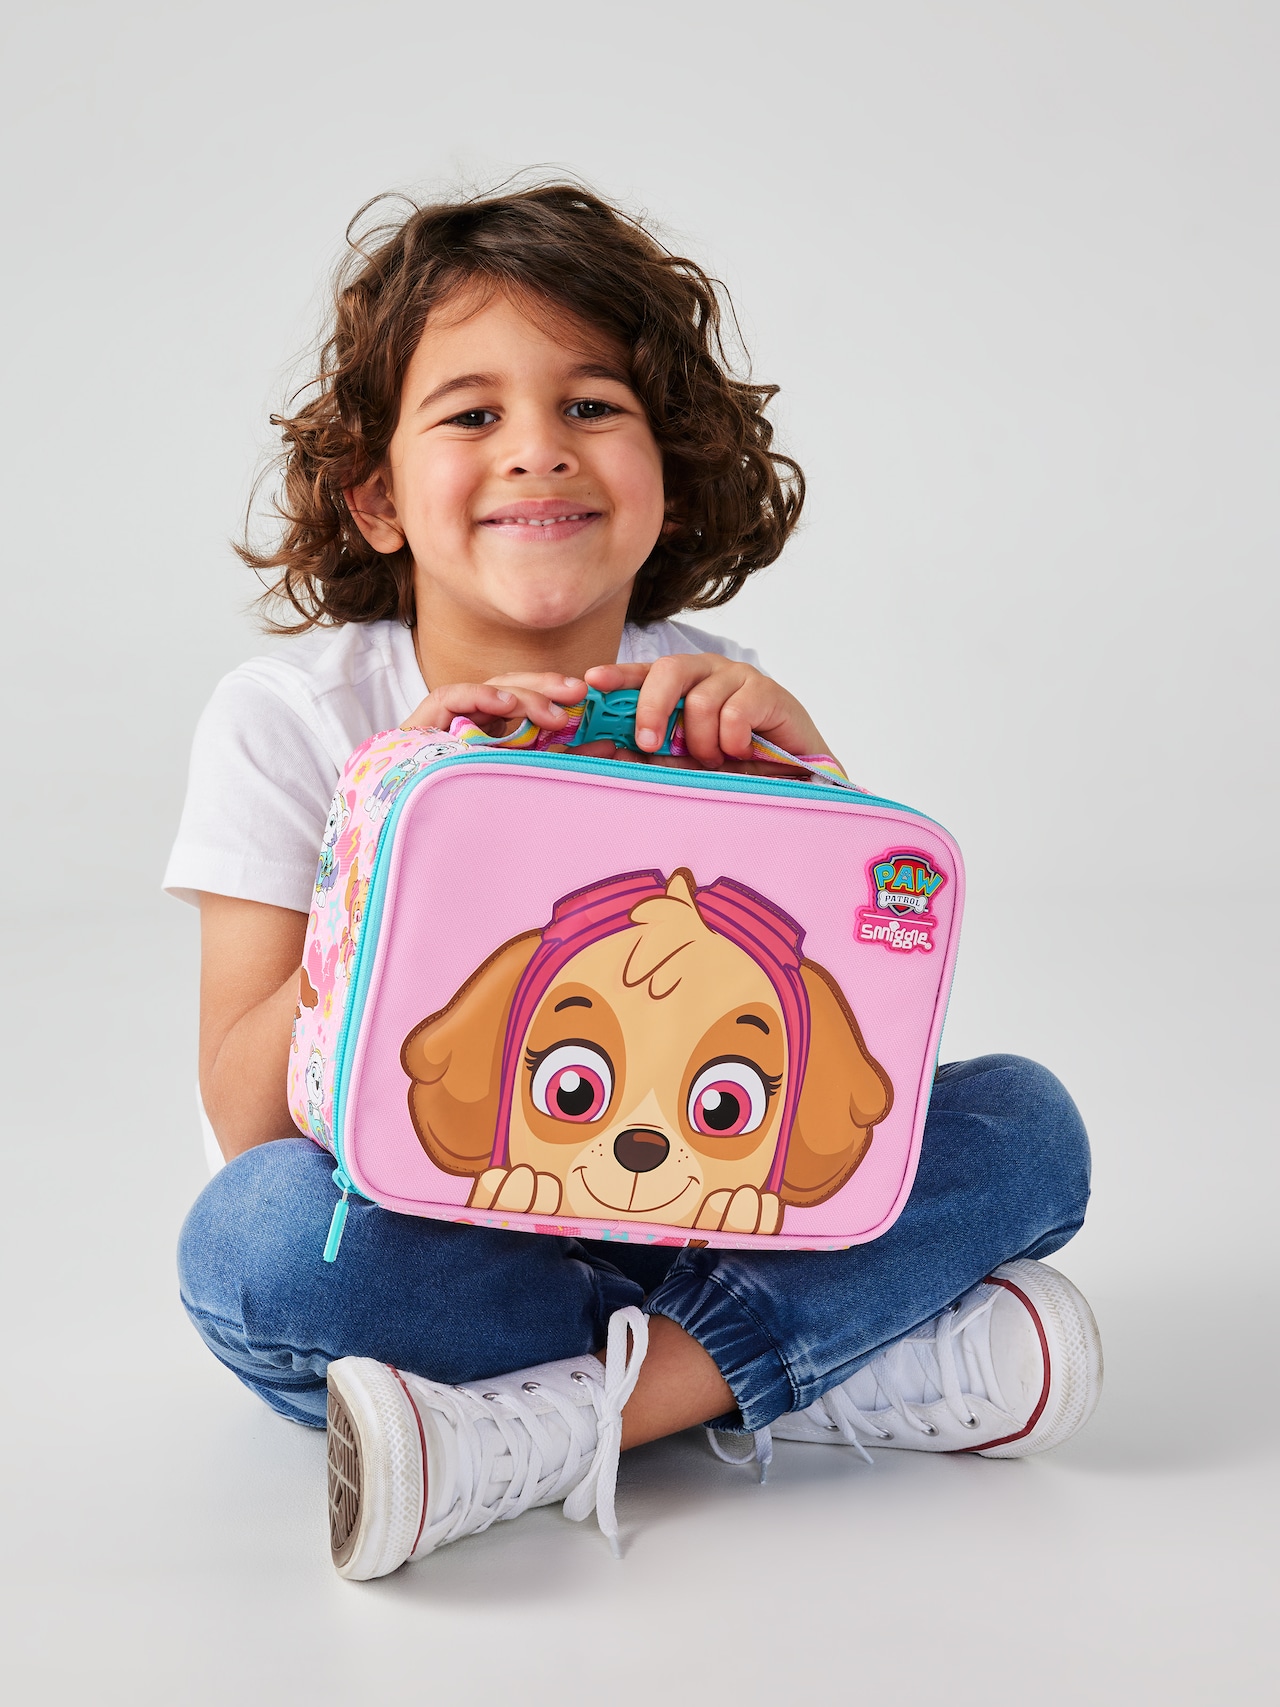 Paw Patrol Teeny Tiny Square Lunchbox - Smiggle Online